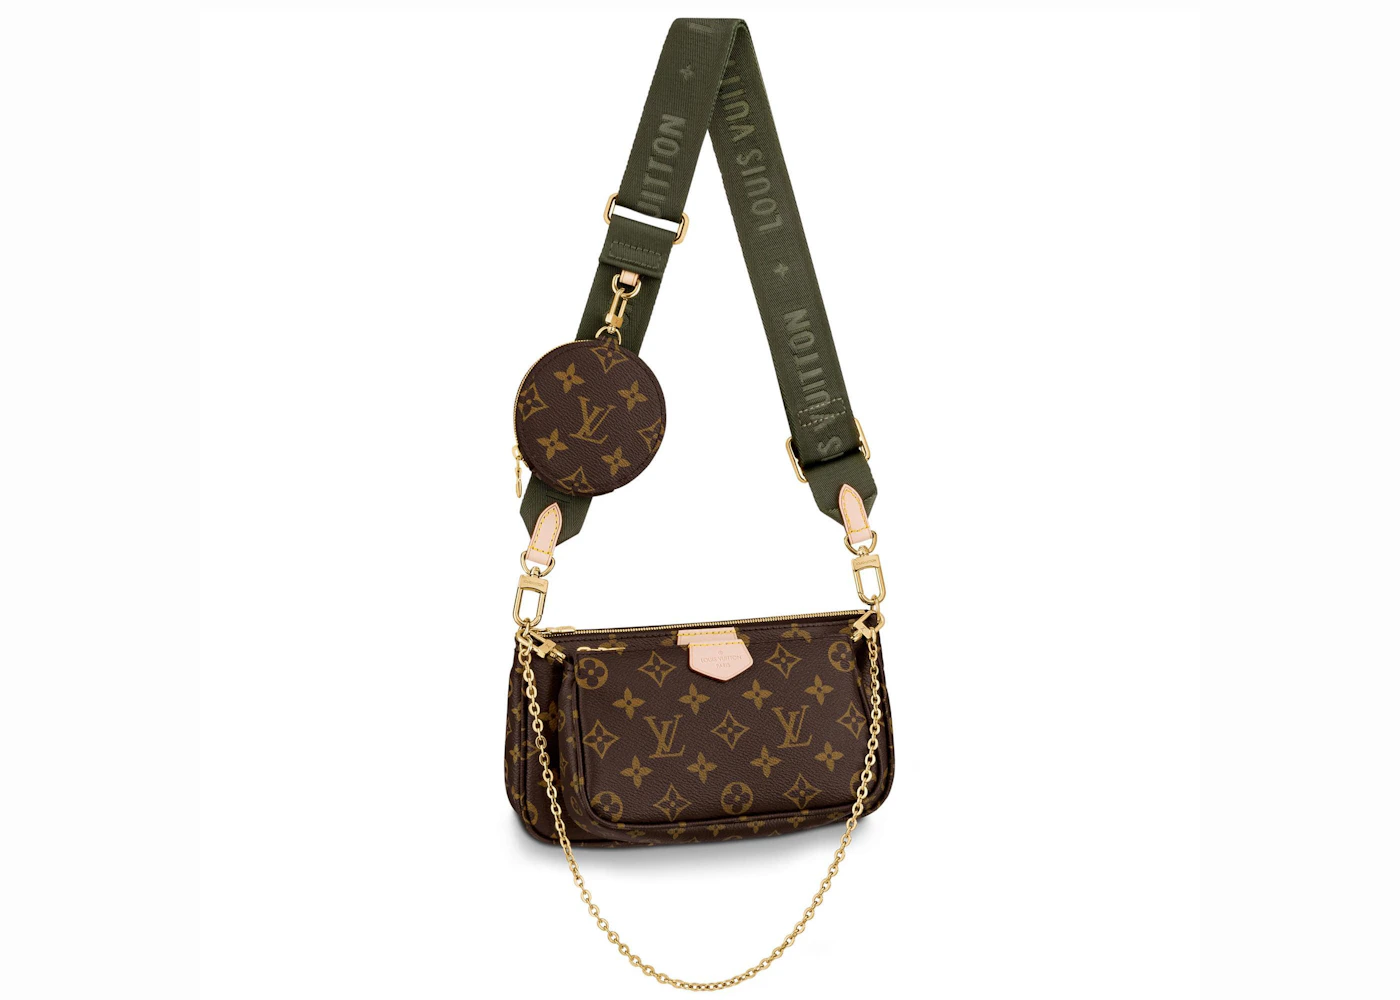 Four Louis Vuitton Crossbody Bags You Need Now, Handbags & Accessories